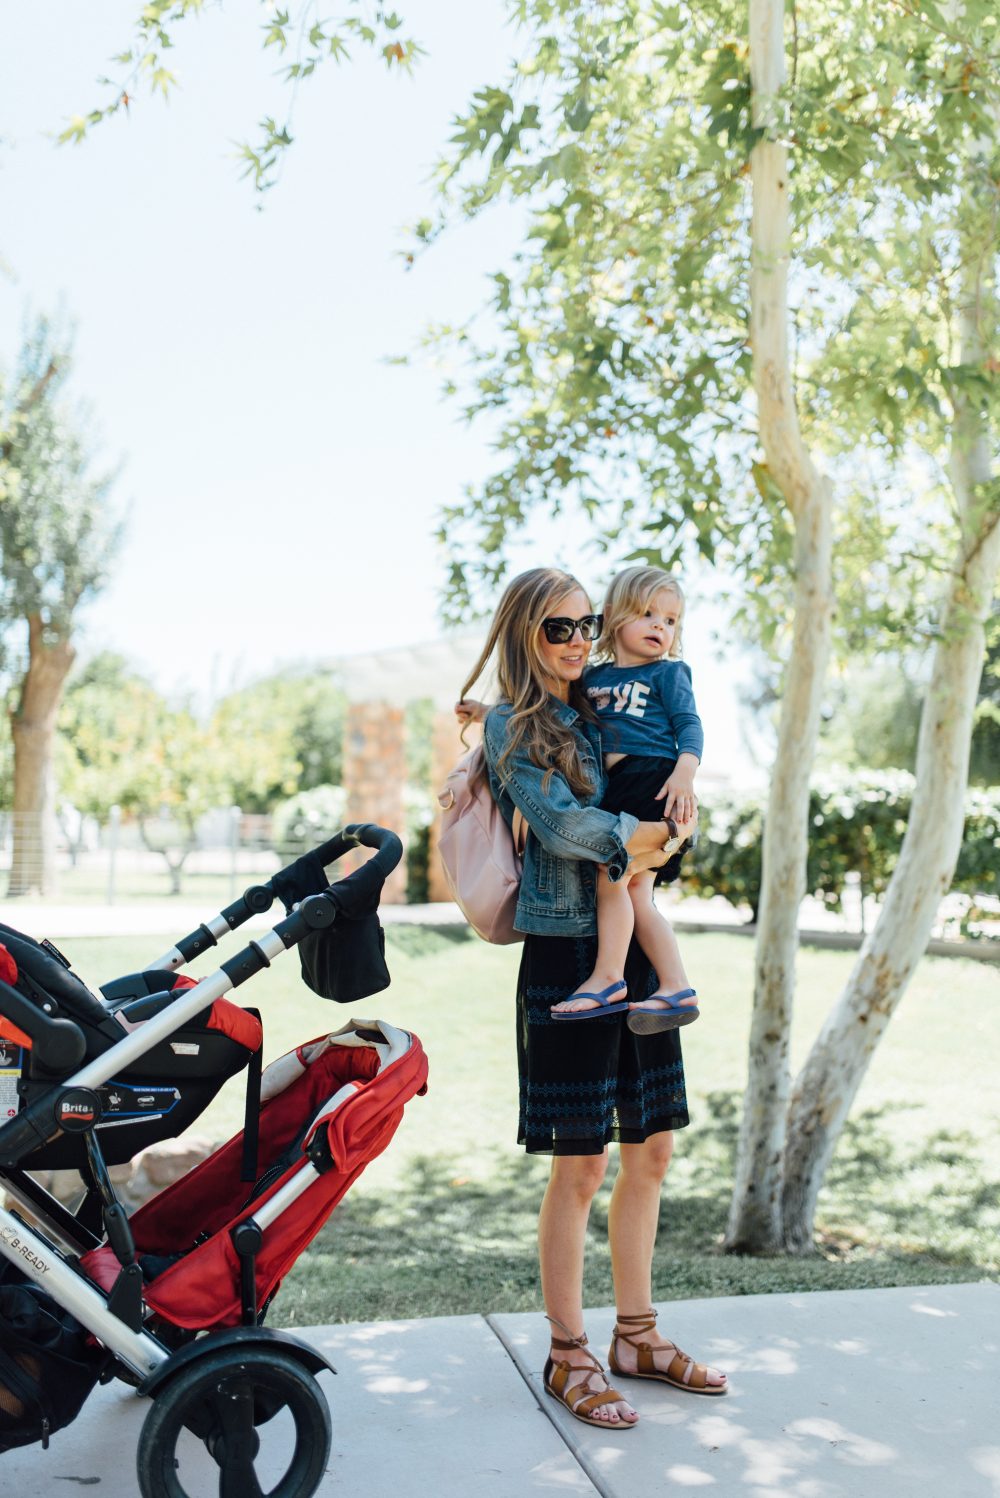 best double stroller for infant and toddler